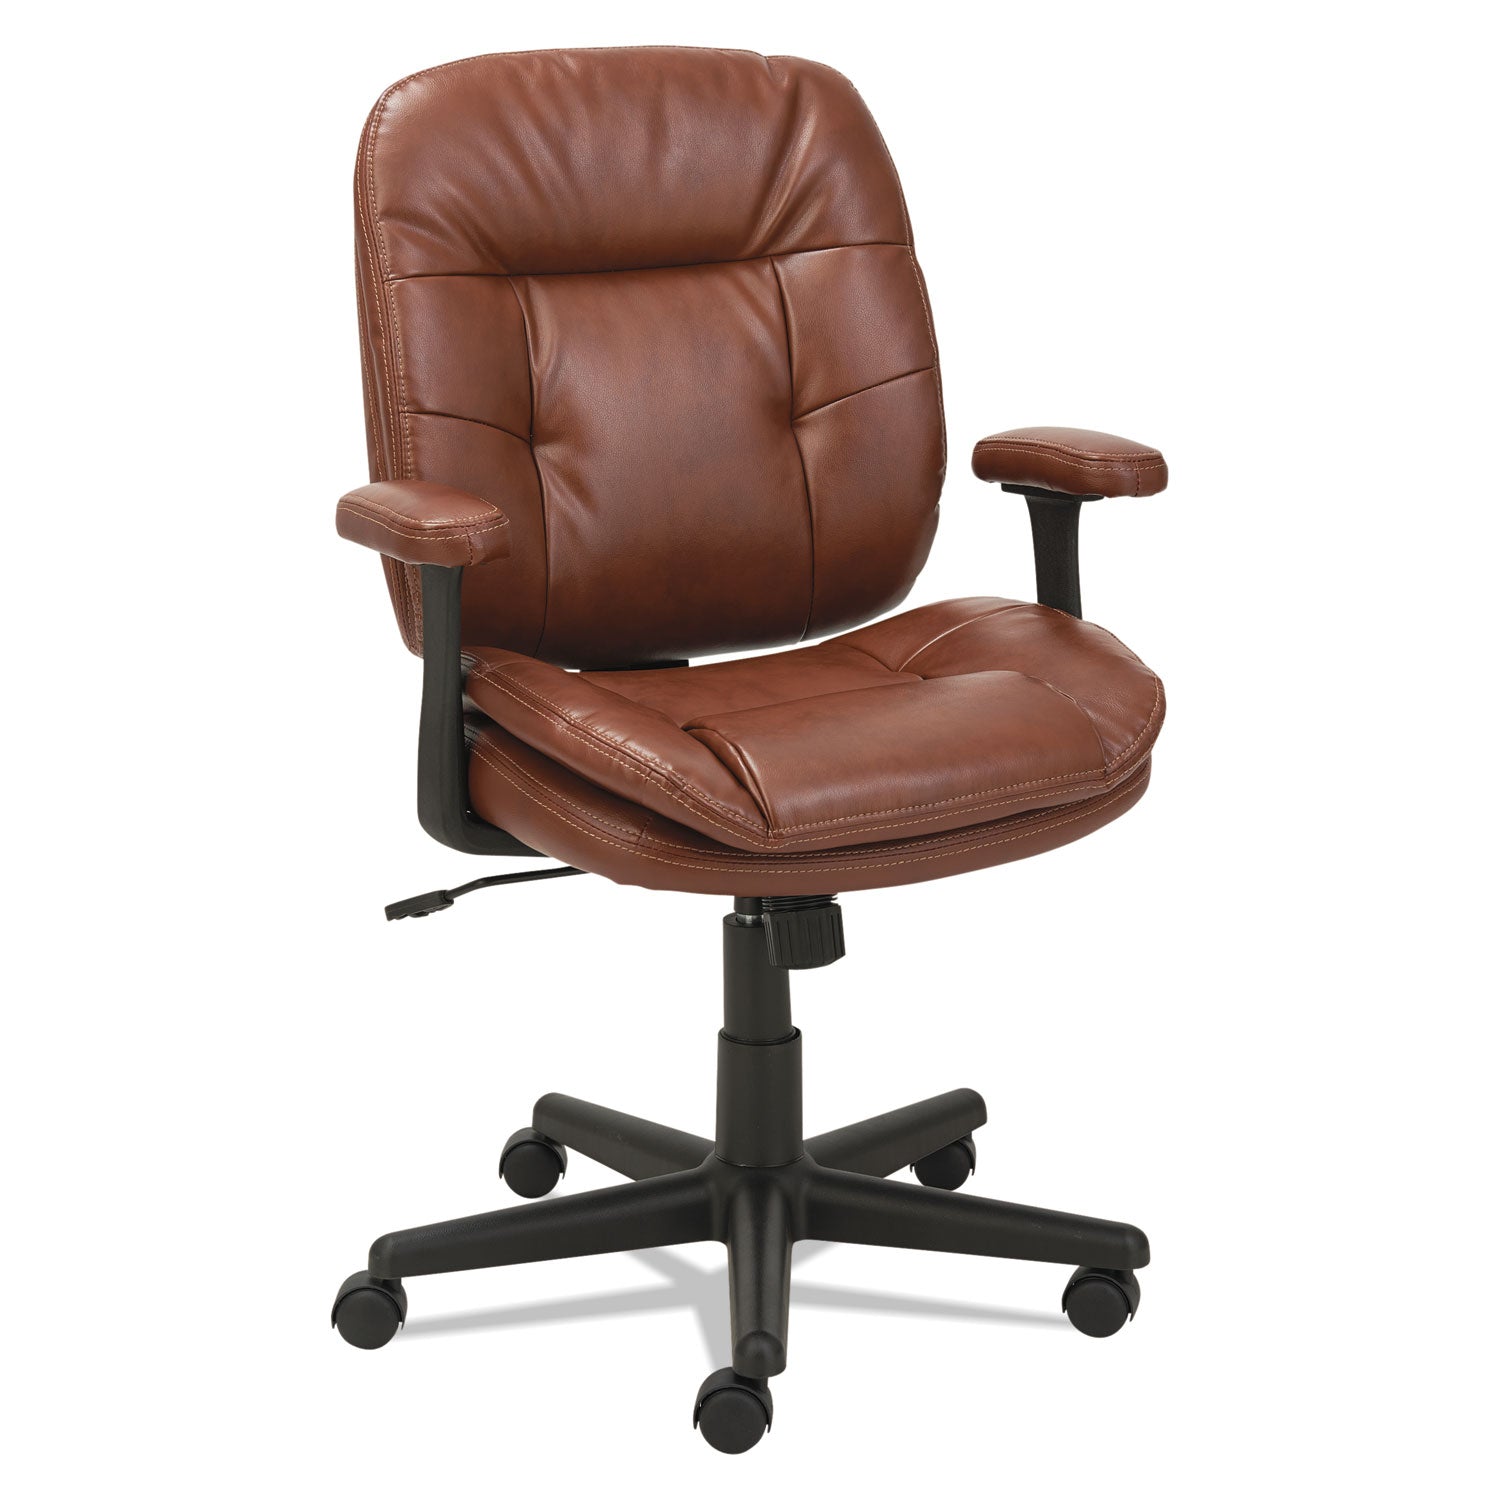 swivel-tilt-bonded-leather-task-chair-supports-250-lb-1693-to-2067-seat-height-chestnut-brown-seat-back-black-base_oifst4859 - 2